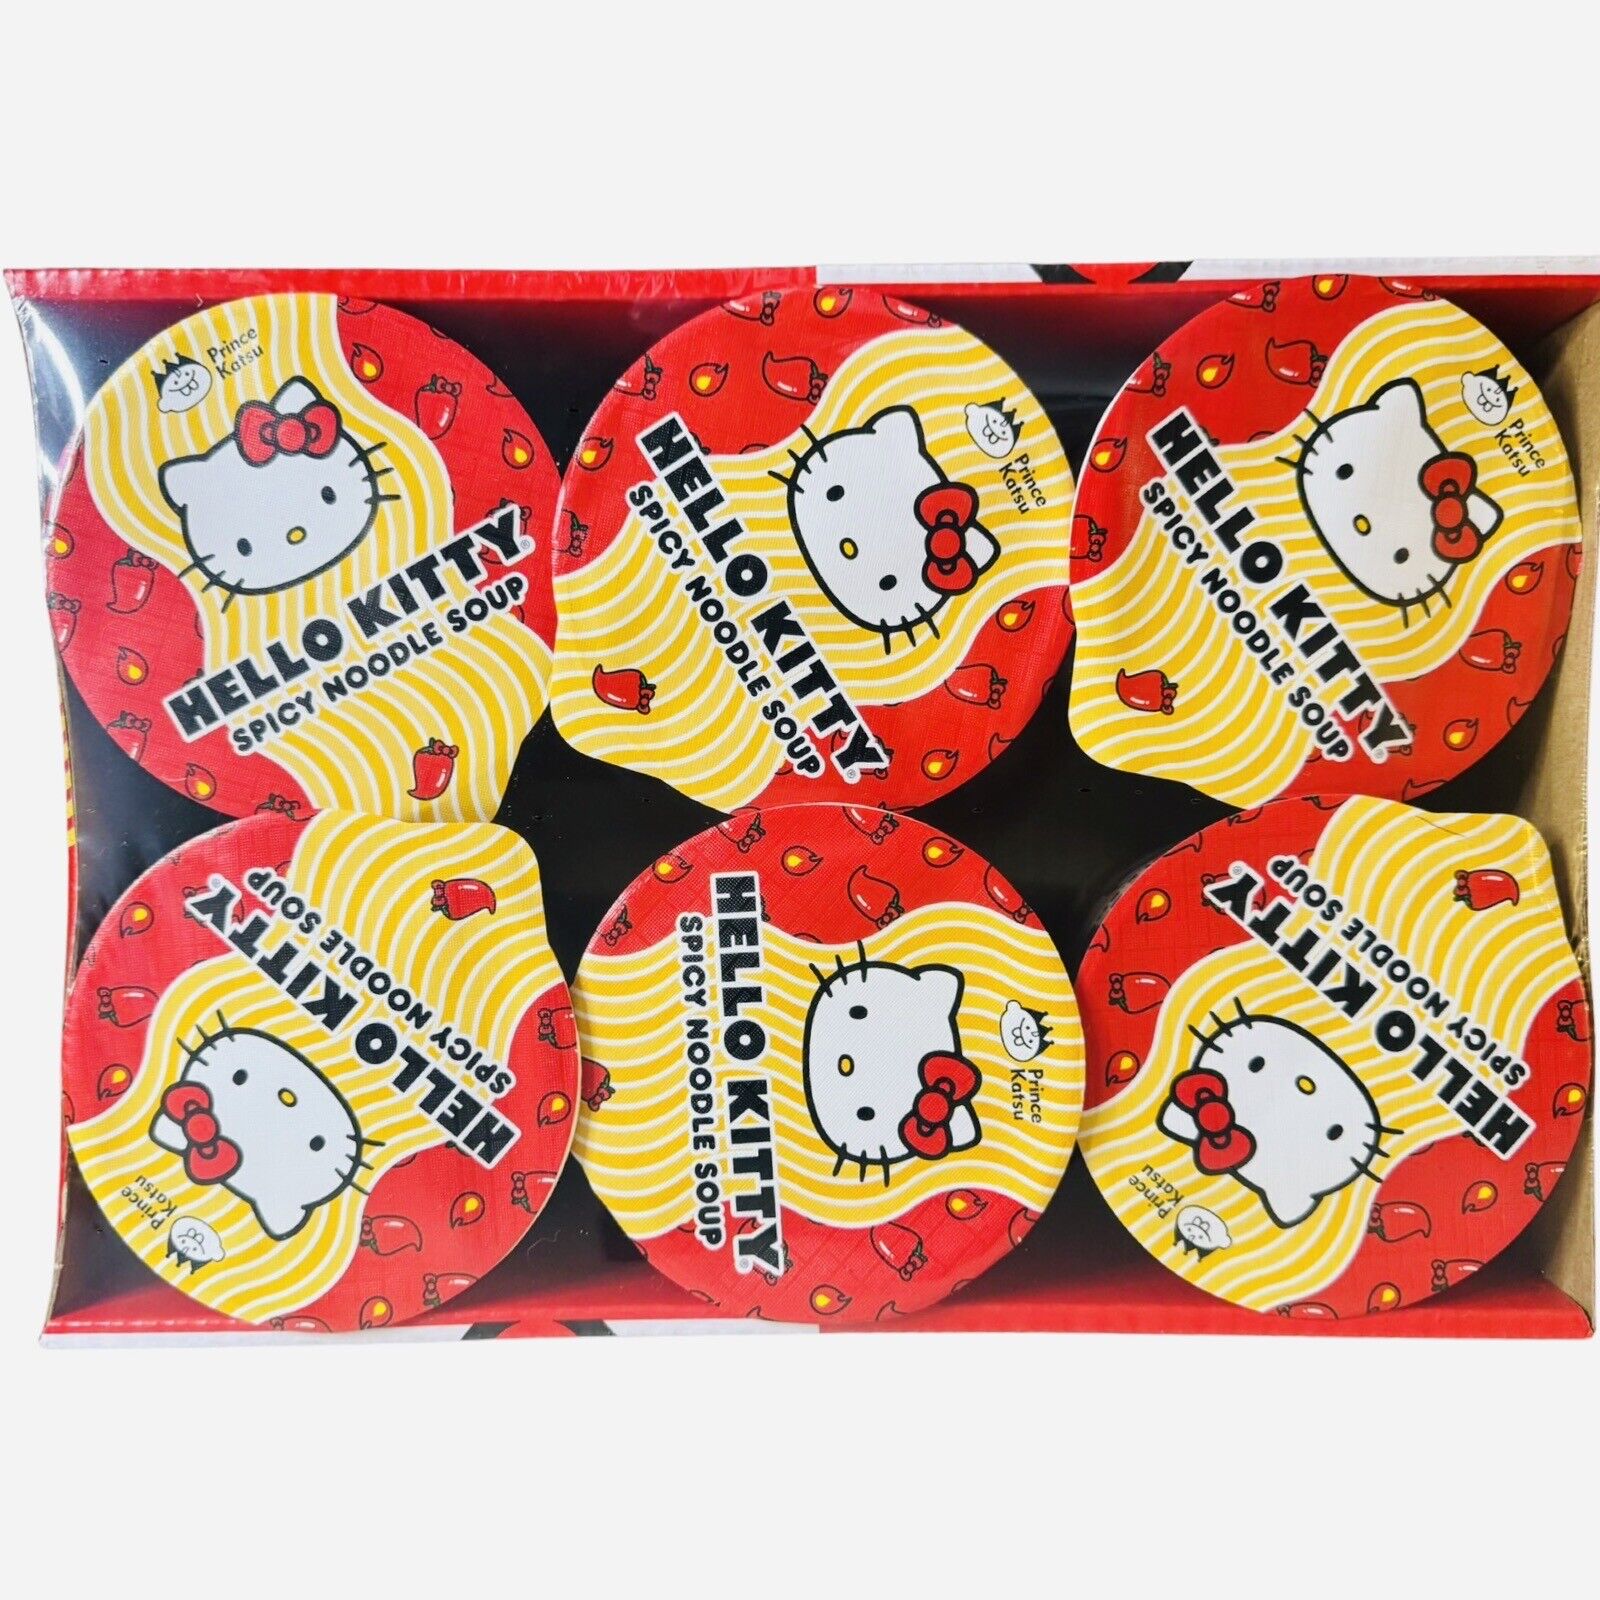 Hello Kitty Spicy Noodle Soup 6-Pack 65g / cup Spicy Flavor